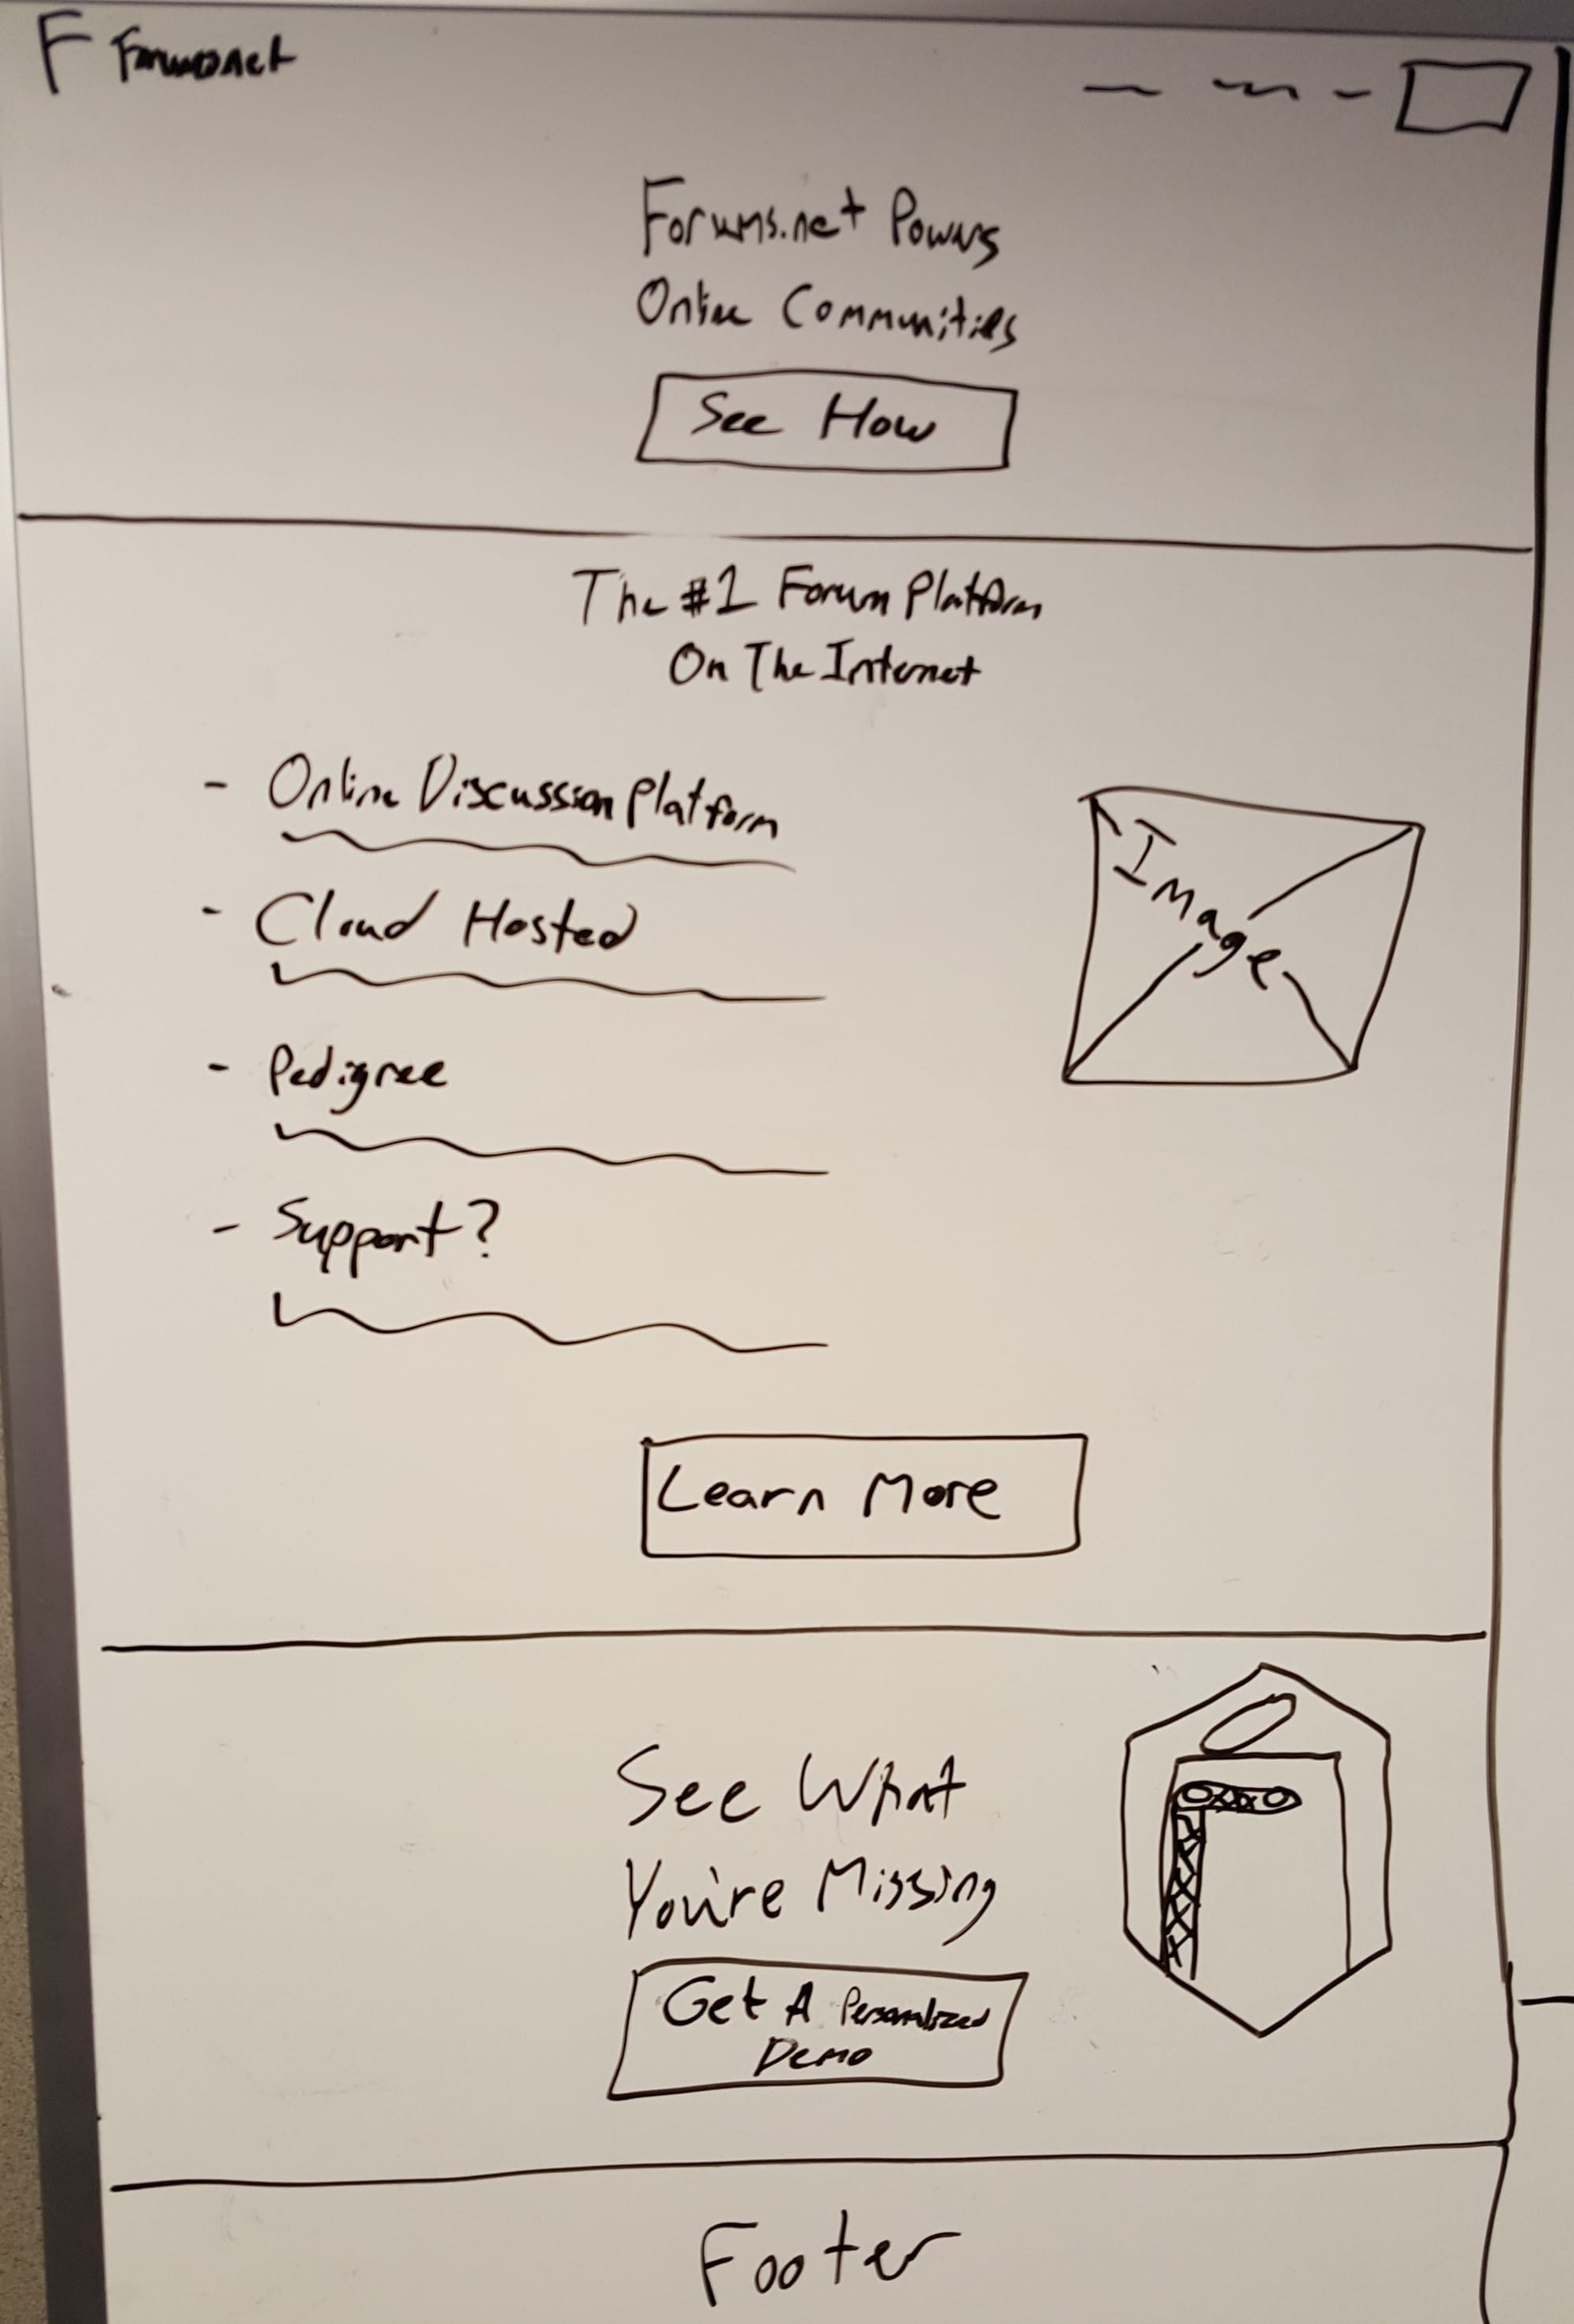 Whiteboard mockup from our design sprint